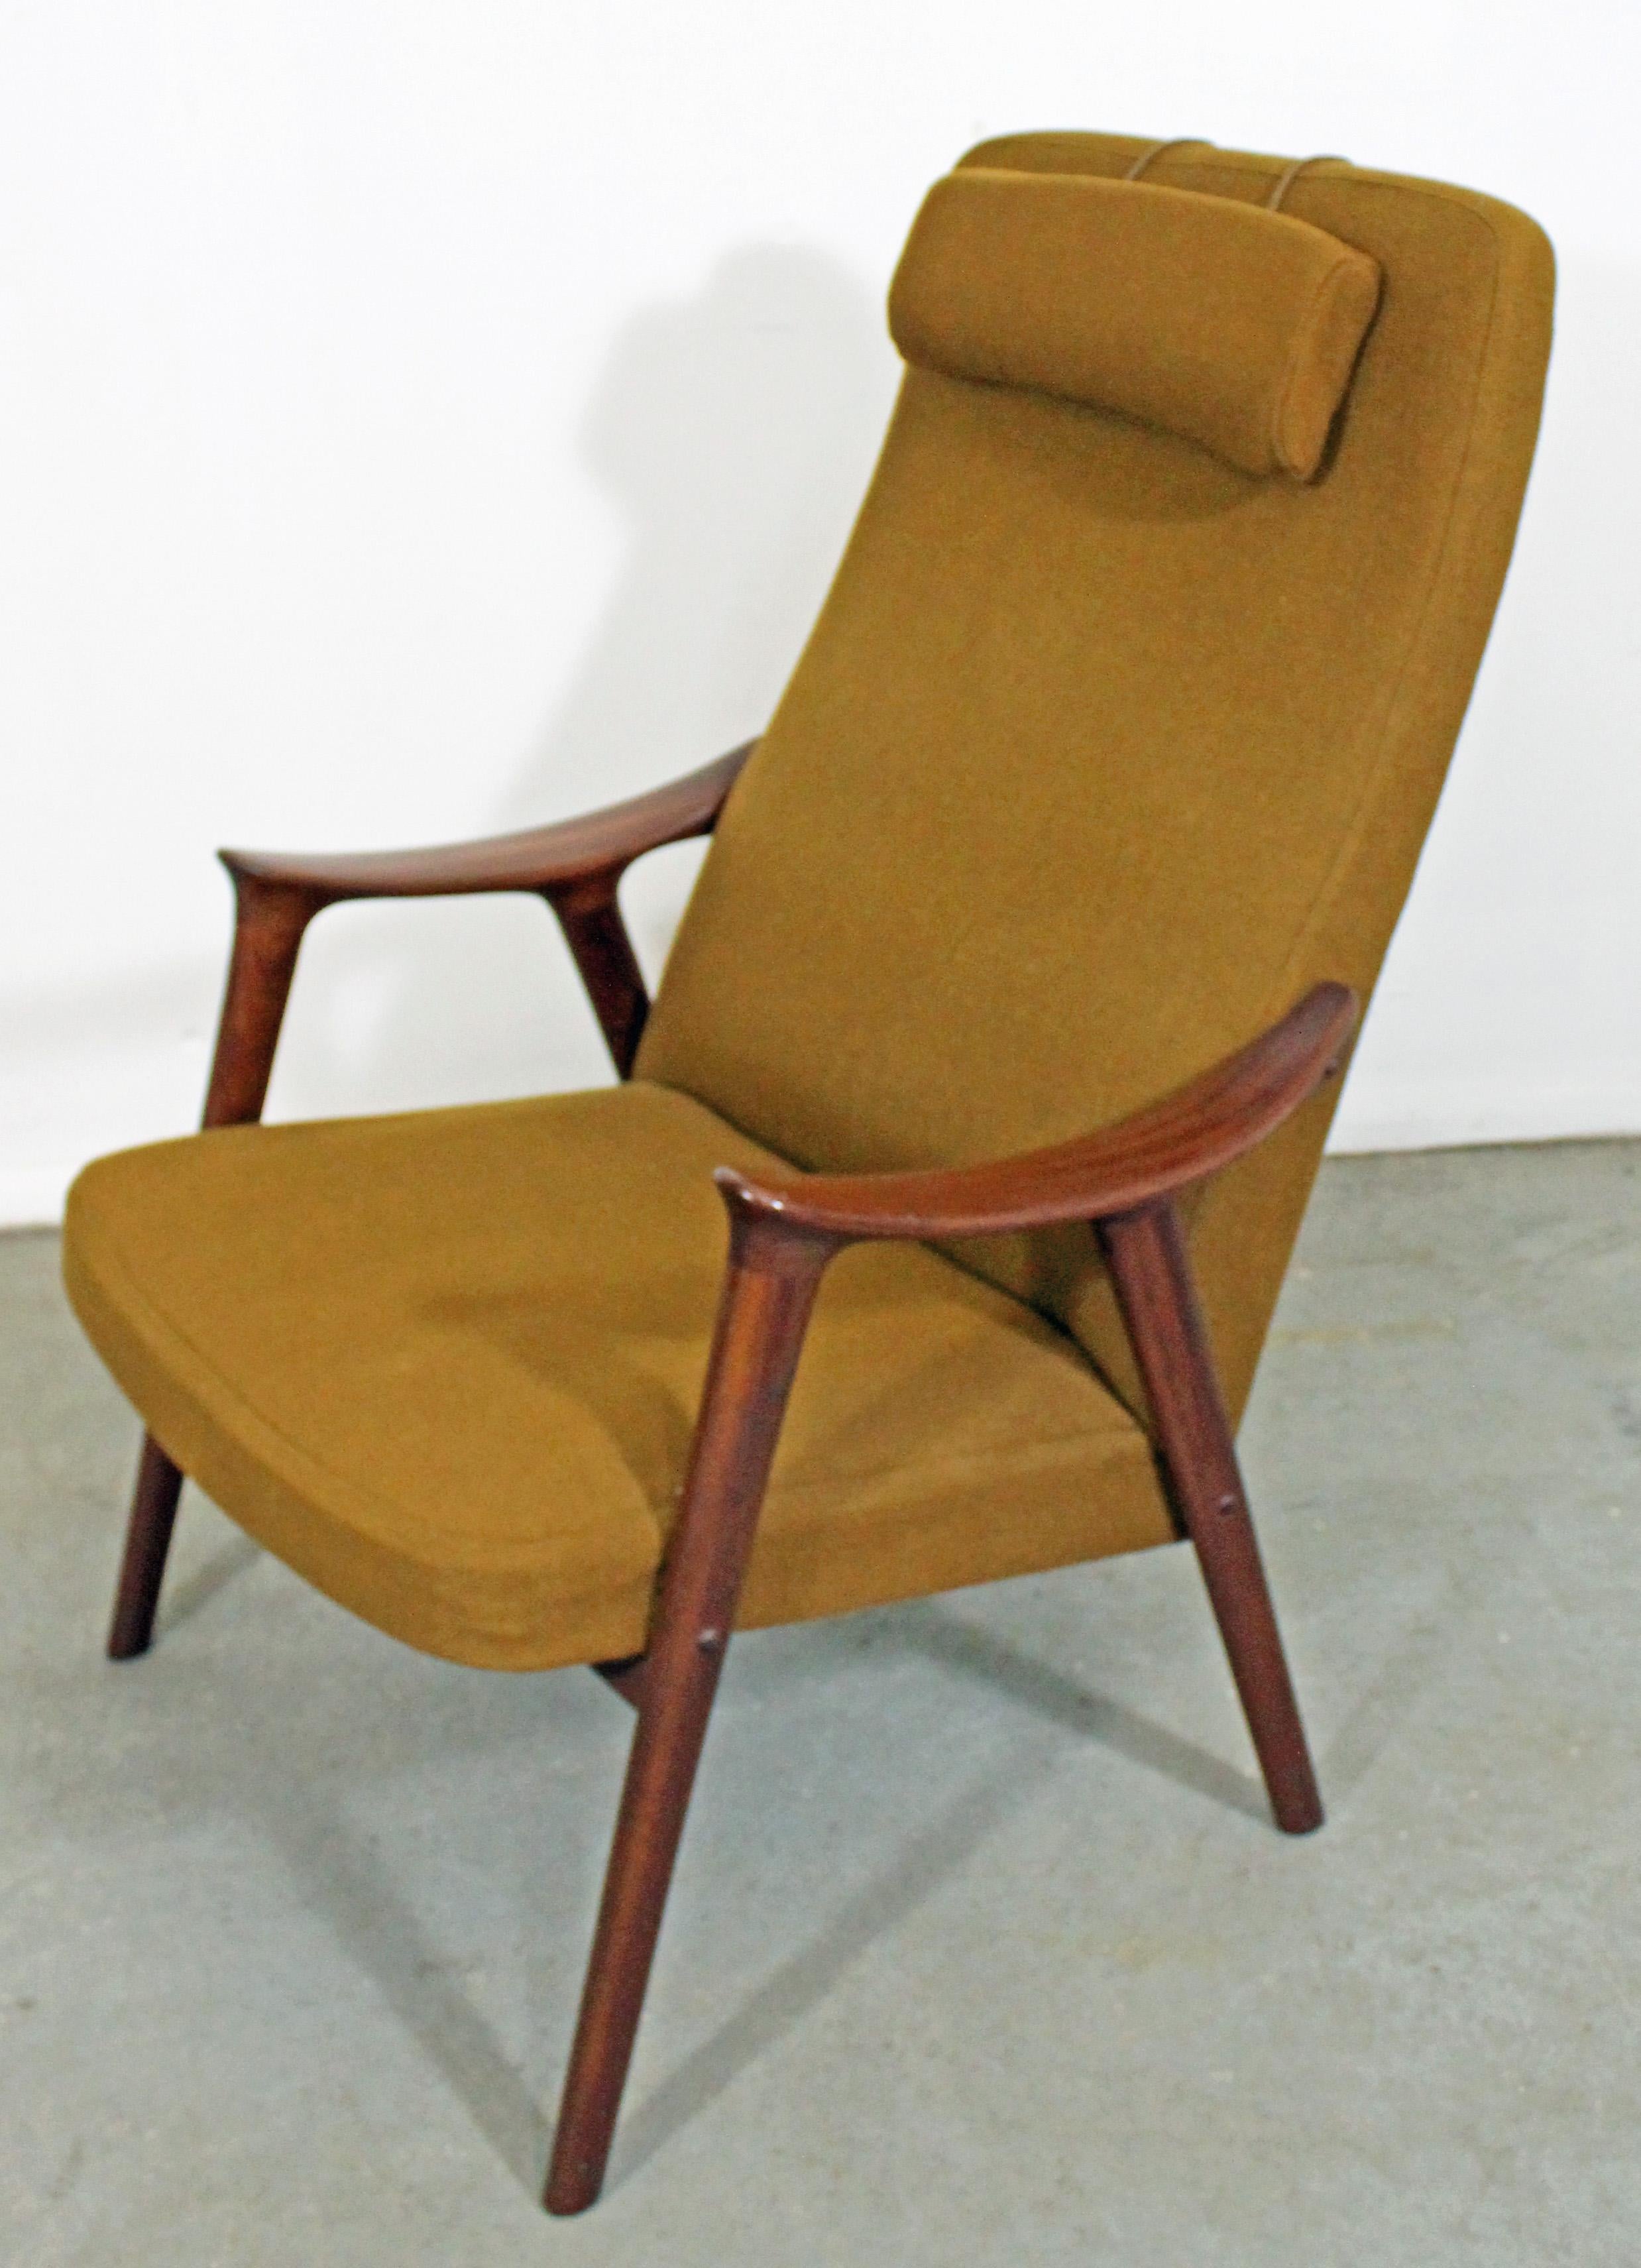 Offered is a 1950s Scandinavian Modern 'Klarinett' lounge chair by Møre Lenestol Fabrikk A/S. It is made of teak wood with a newly re-cushioned and removable, weighted headrest. It is in decent vintage condition, showing some age wear (small tear in